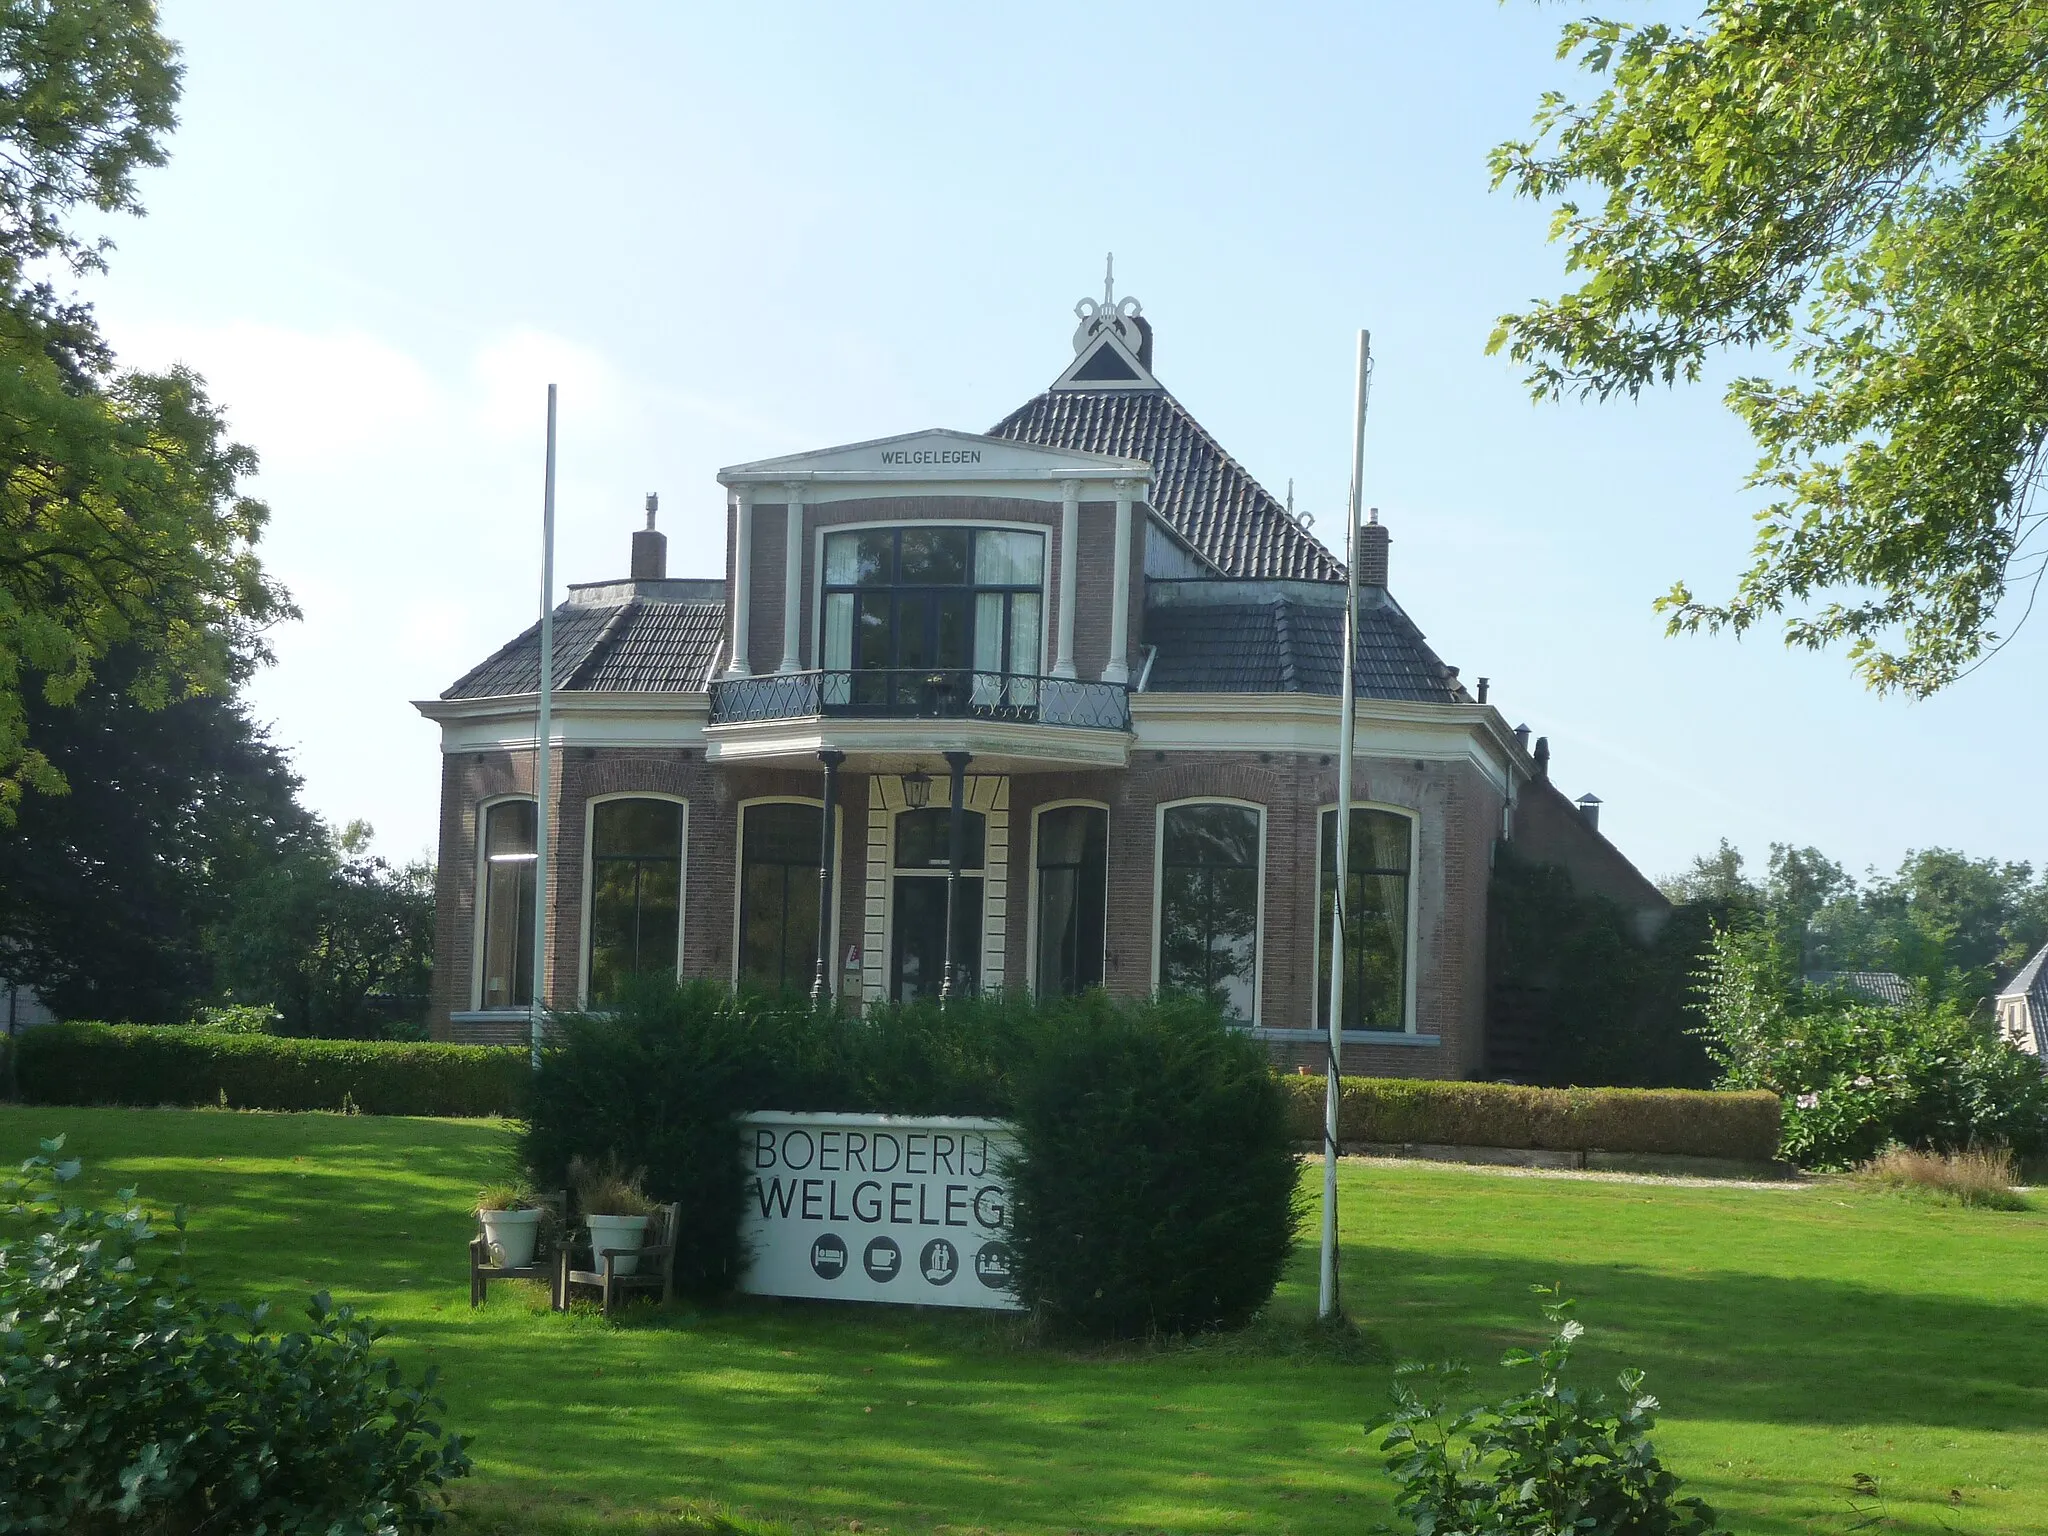 Photo showing: This is an image of a municipal monument in De Fryske Marren with number